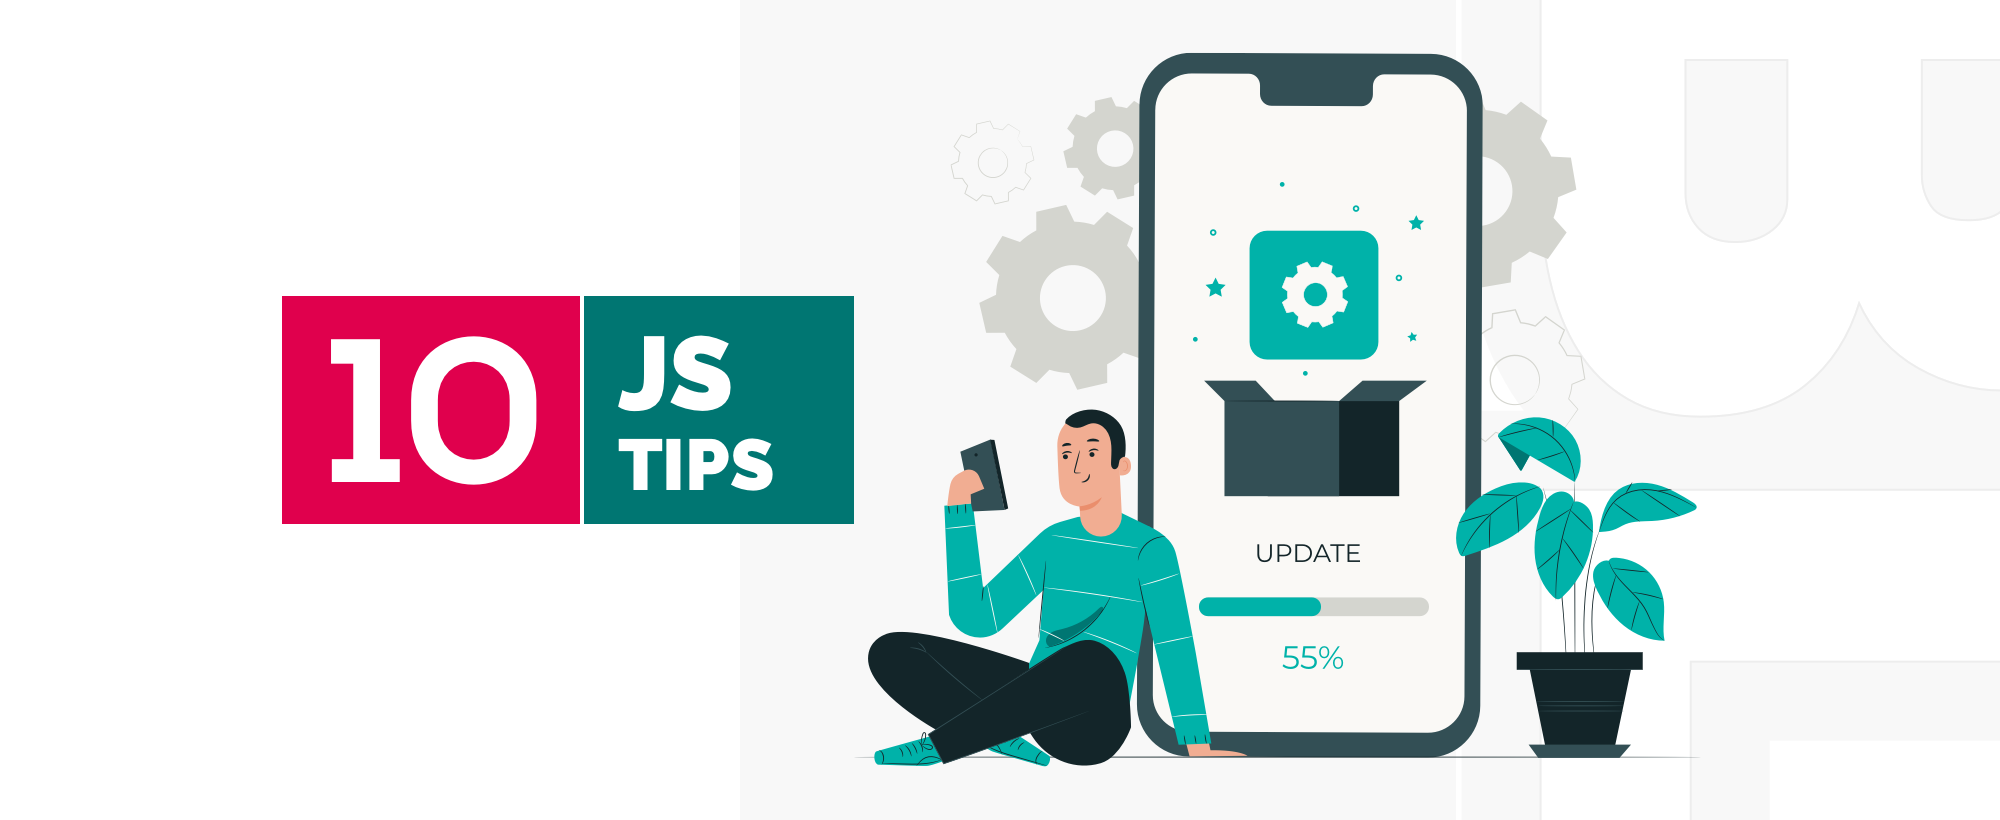 Top 10 Tips to increase the performance of your JavaScript app